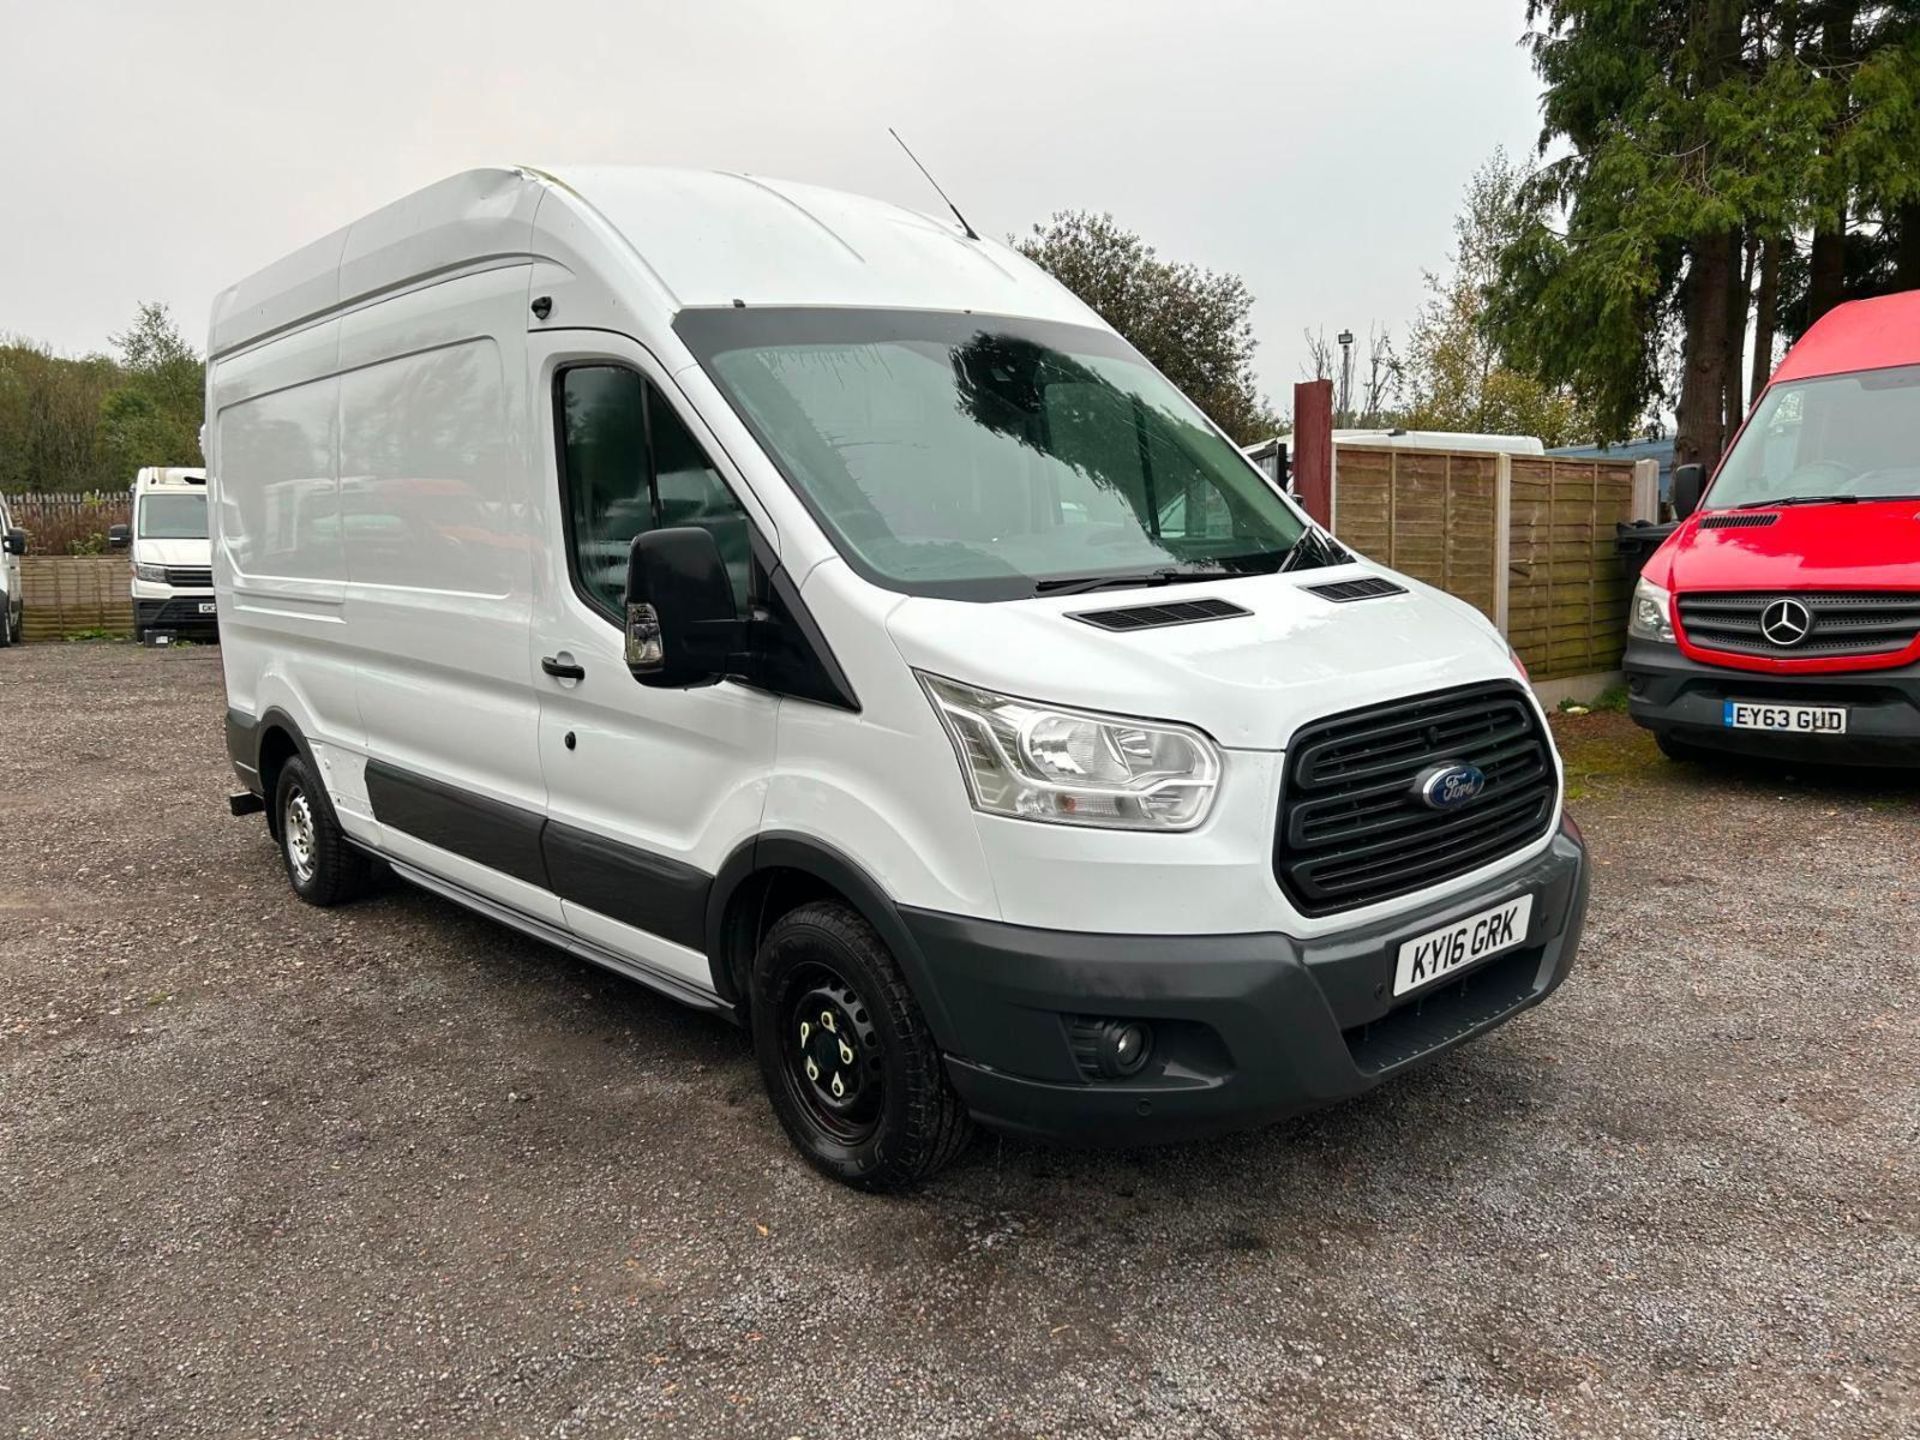 RELIABLE WORKHORSE: 2016 FORD TRANSIT 2.2 TDCI L3 H3 PANEL VAN